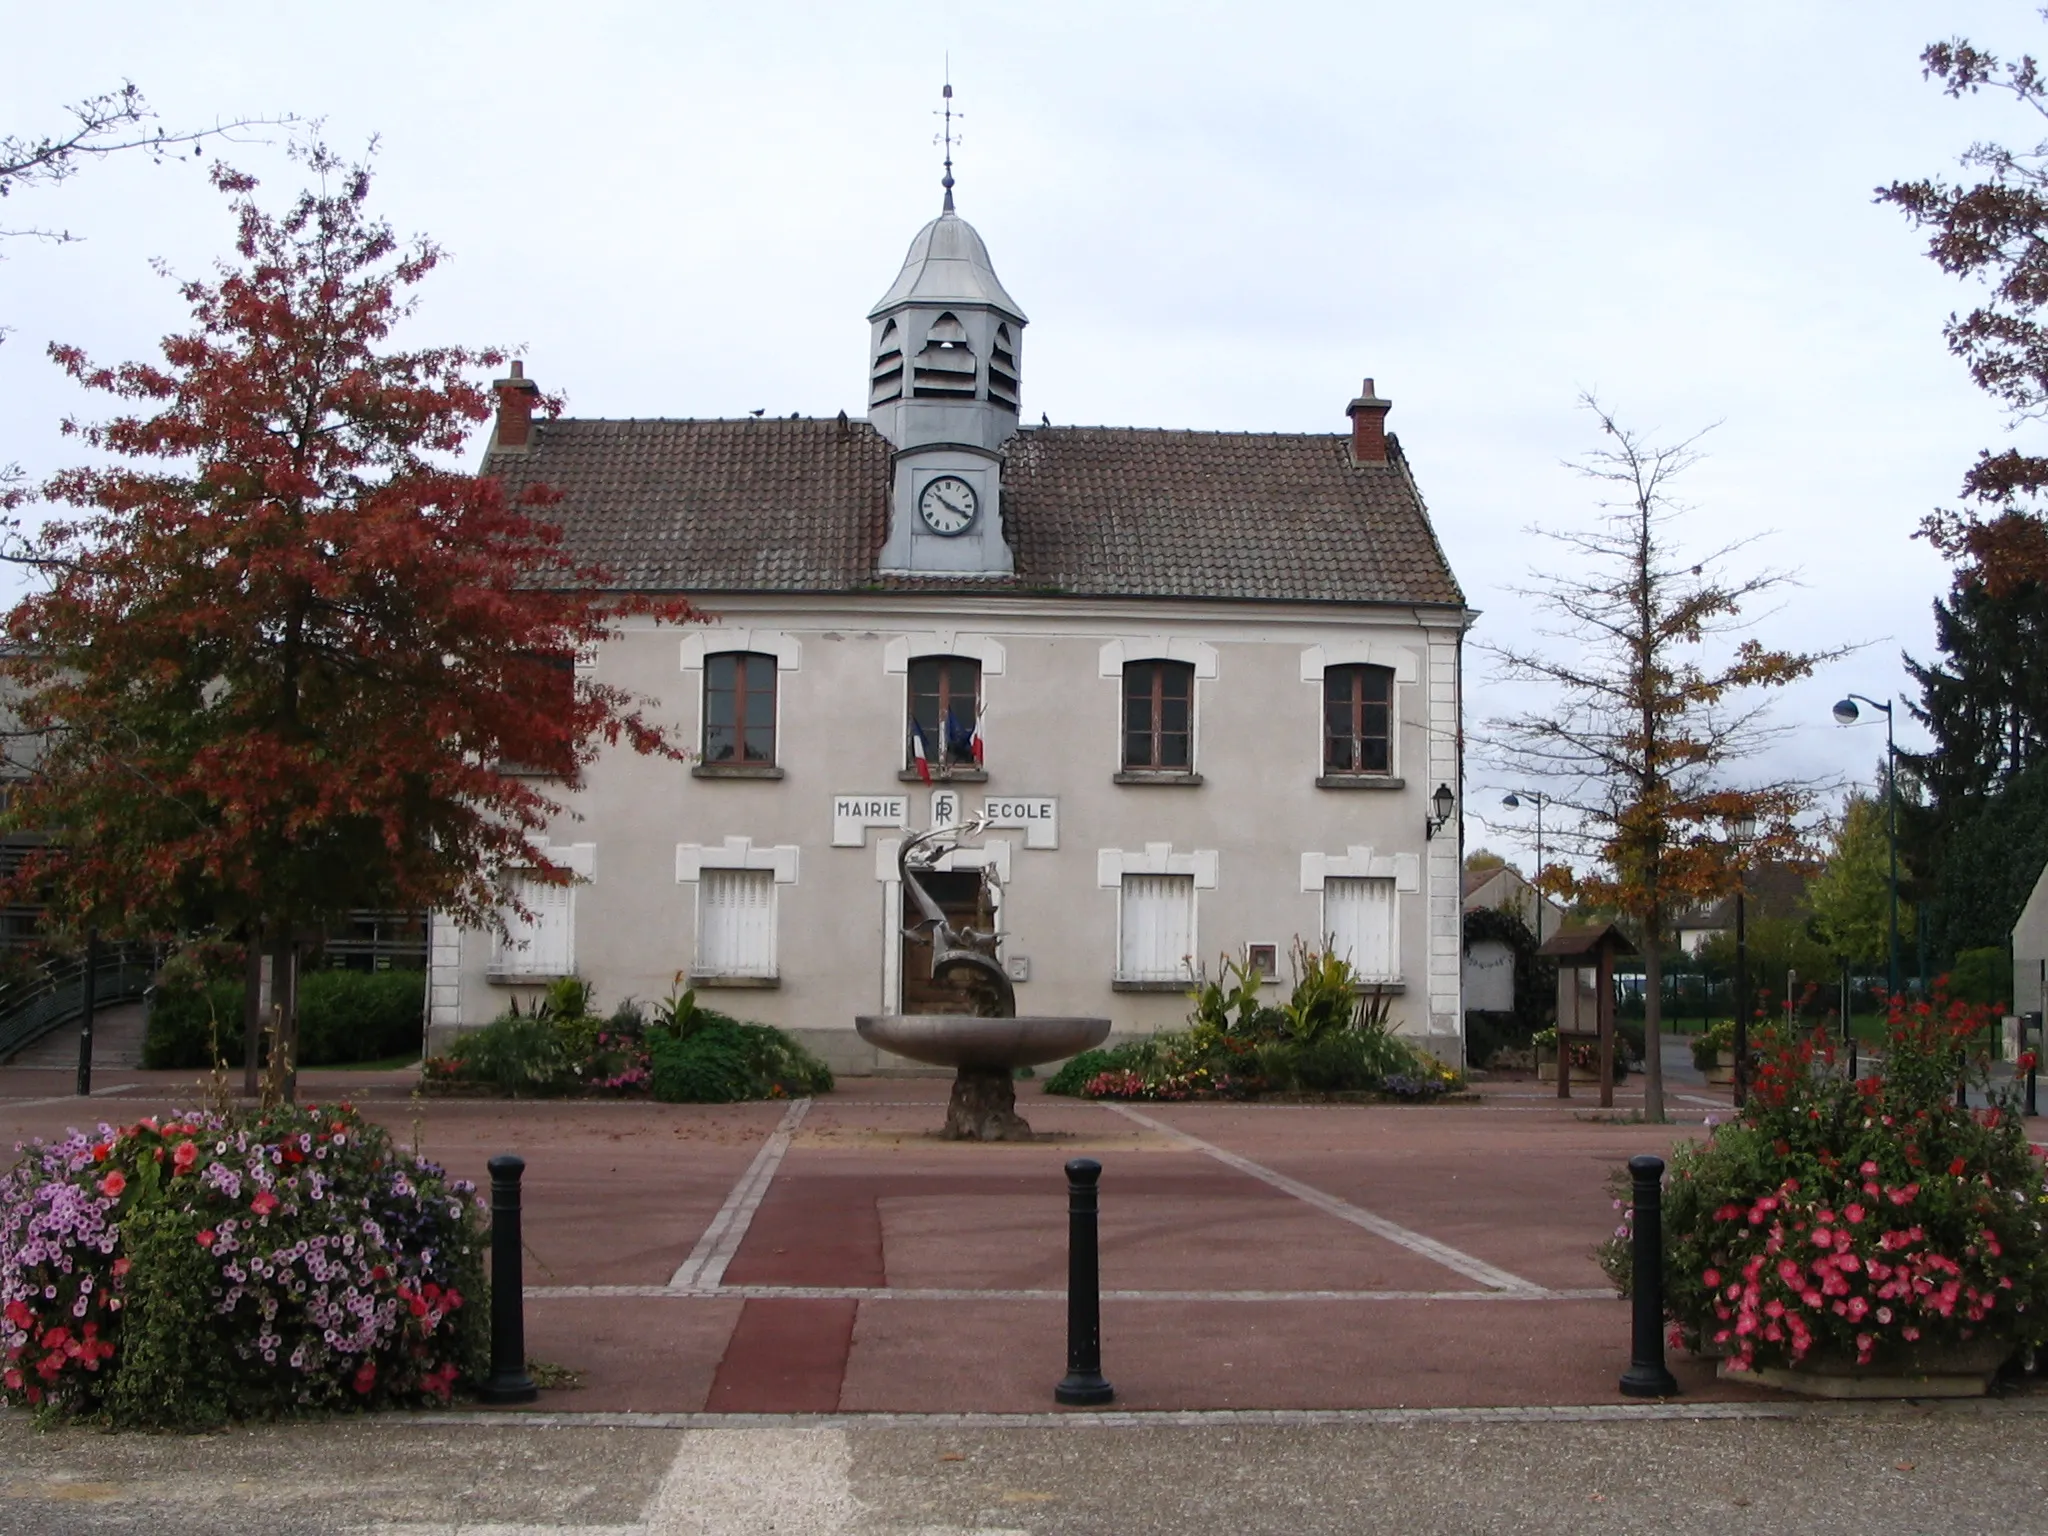 Photo showing: The town hall of Bailly-Romainvilliers, Seine-et-Marne, France.